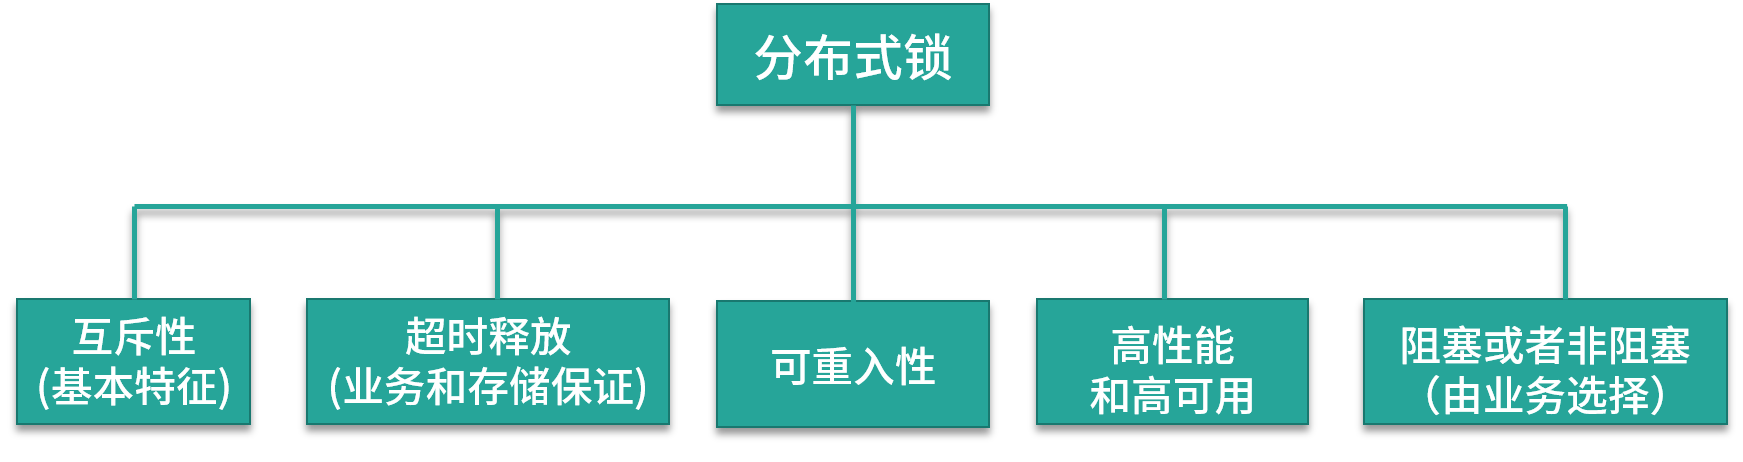 <span style='color:red;'>如何</span><span style='color:red;'>使用</span> Redis <span style='color:red;'>快速</span>实现分布式锁？